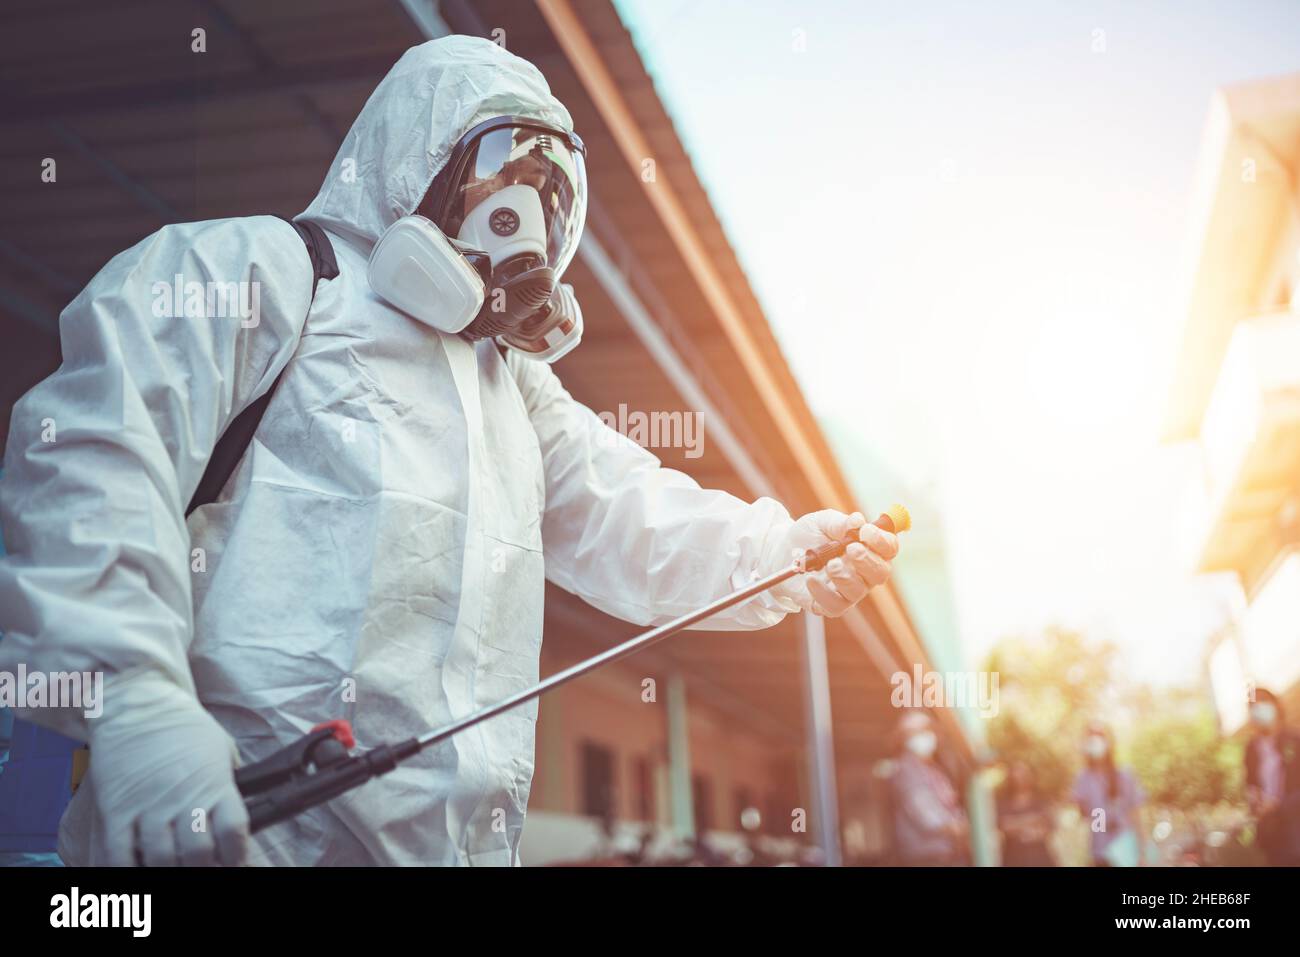 Health workers wear PPE, spraying disinfectants to prevent the spread of germs or coronavirus. Stock Photo